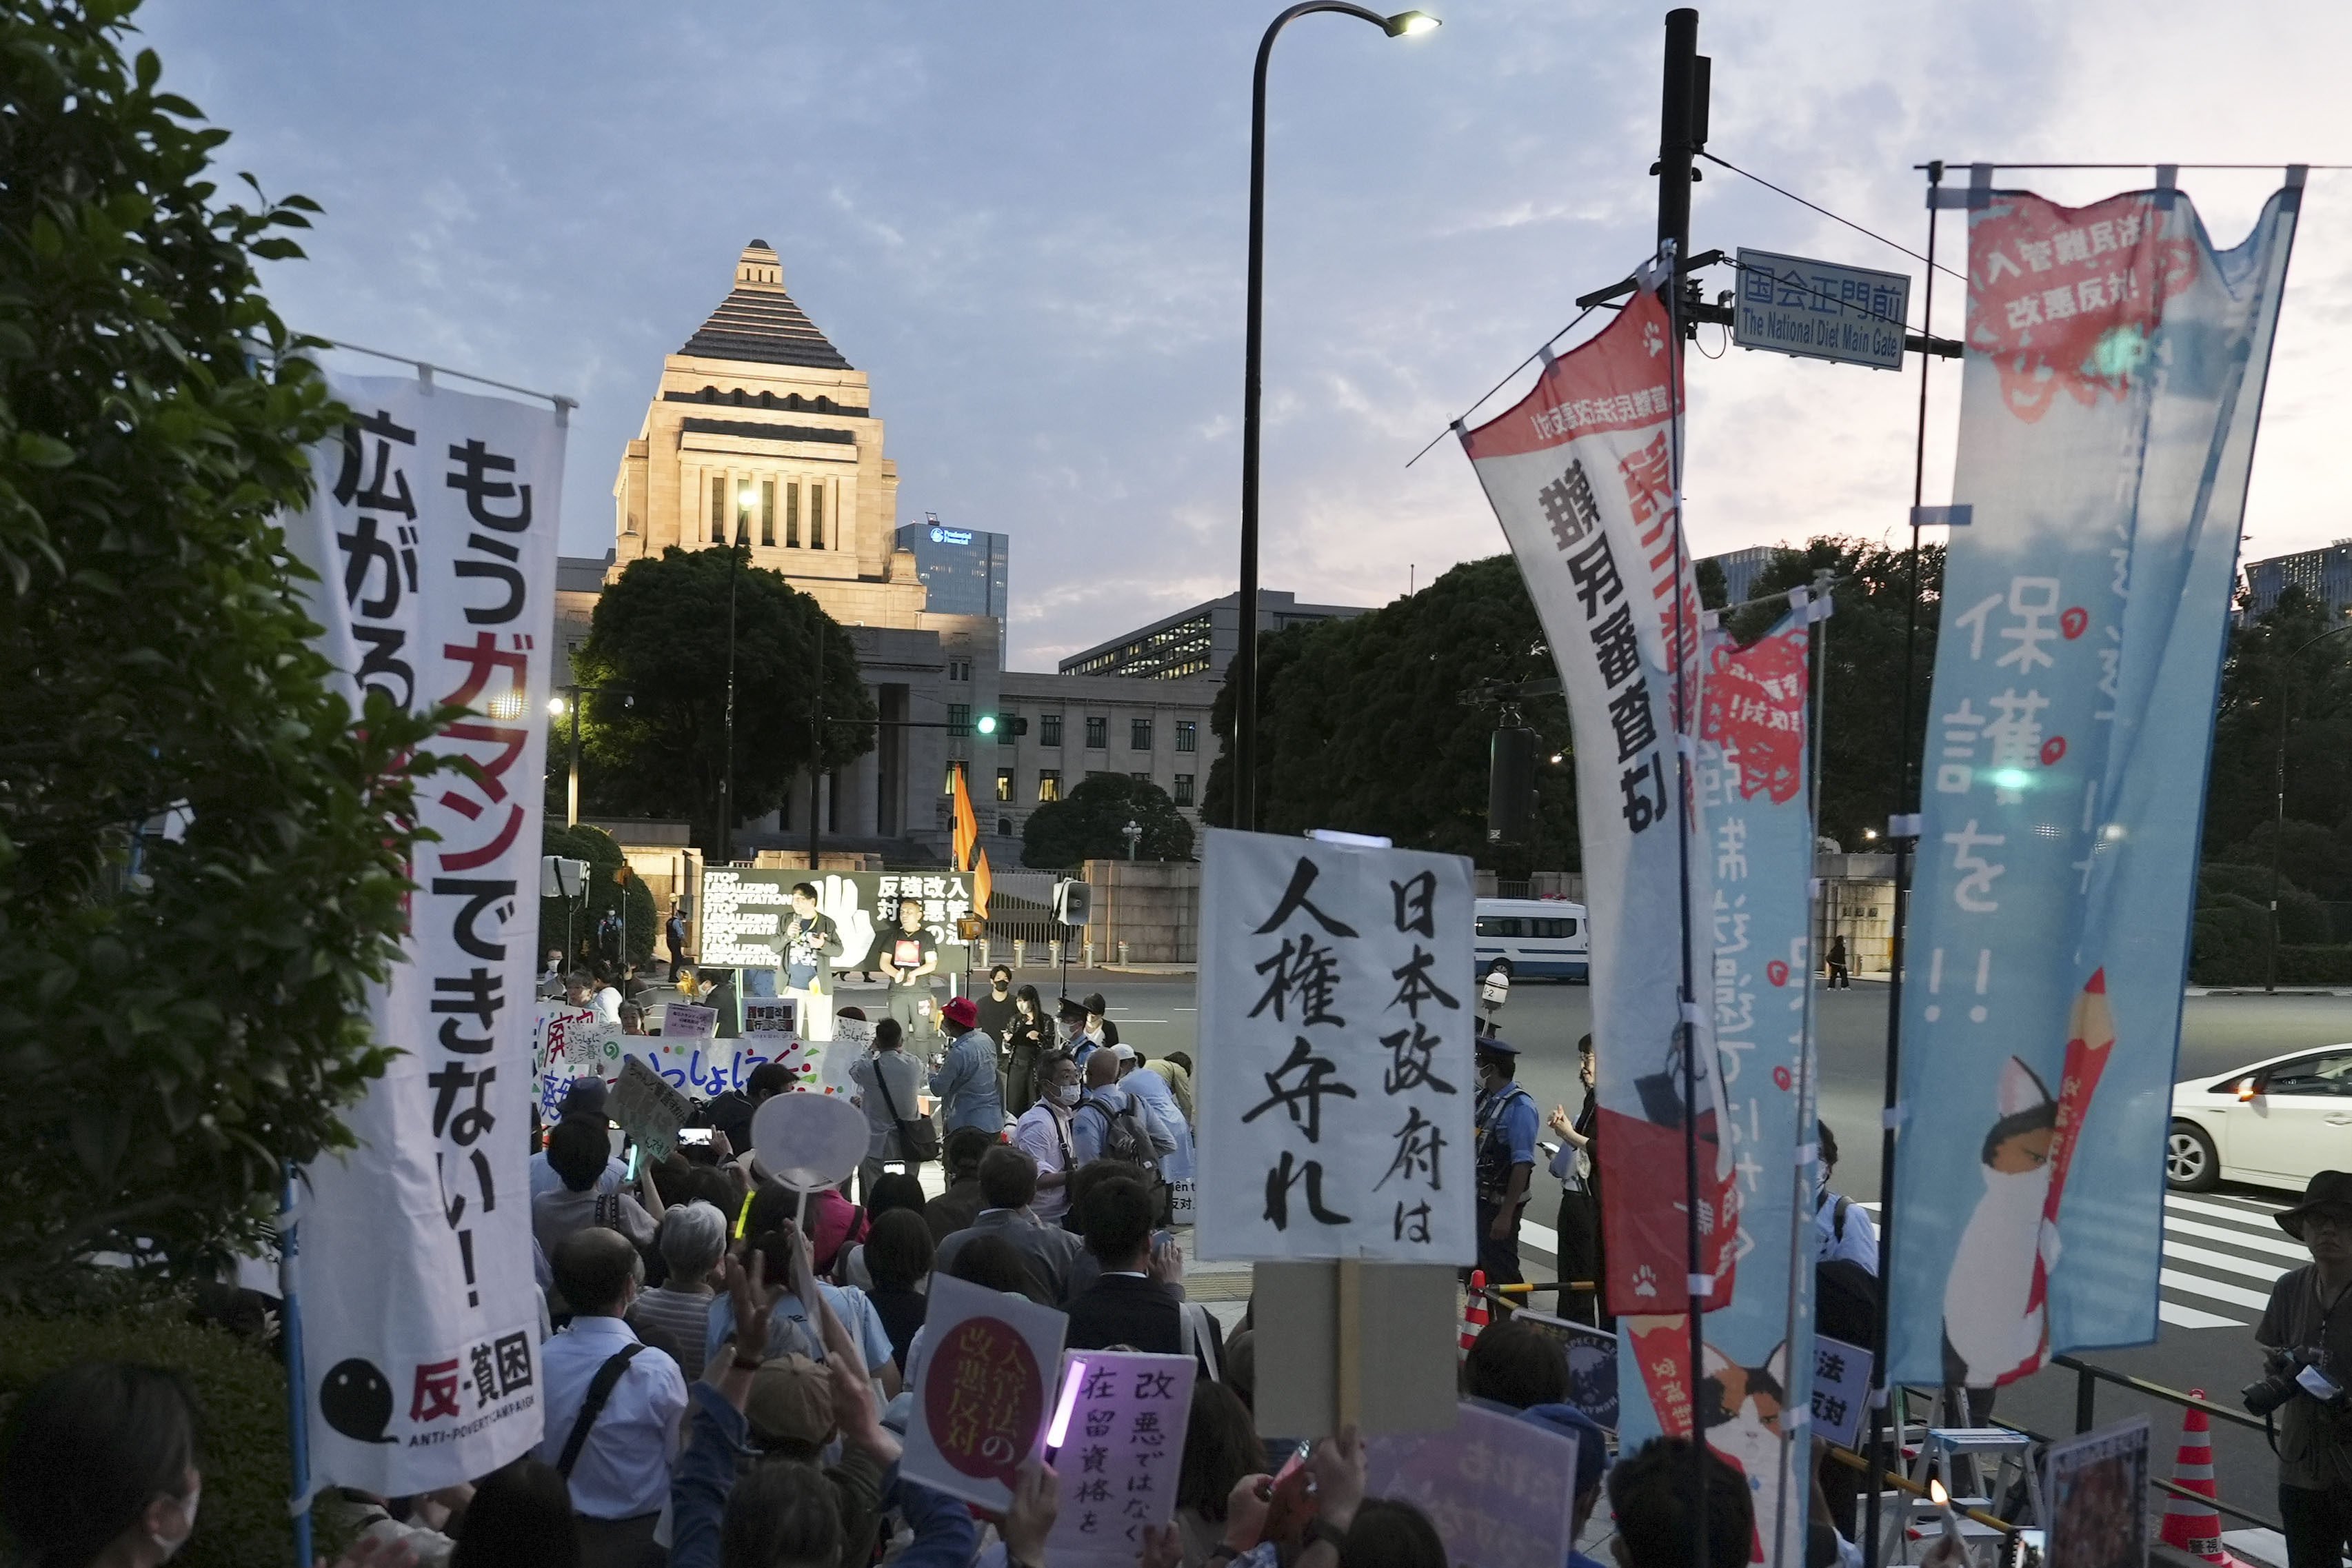 People rally in front of the Diet building in Tokyo on June 5 in opposition to the controversial bill to amend an immigration law enabling authorities to deport individuals who repeatedly apply for refugee status. The harsher measures come as the global refugee situation has worsened worldwide. Photo: Kyodo